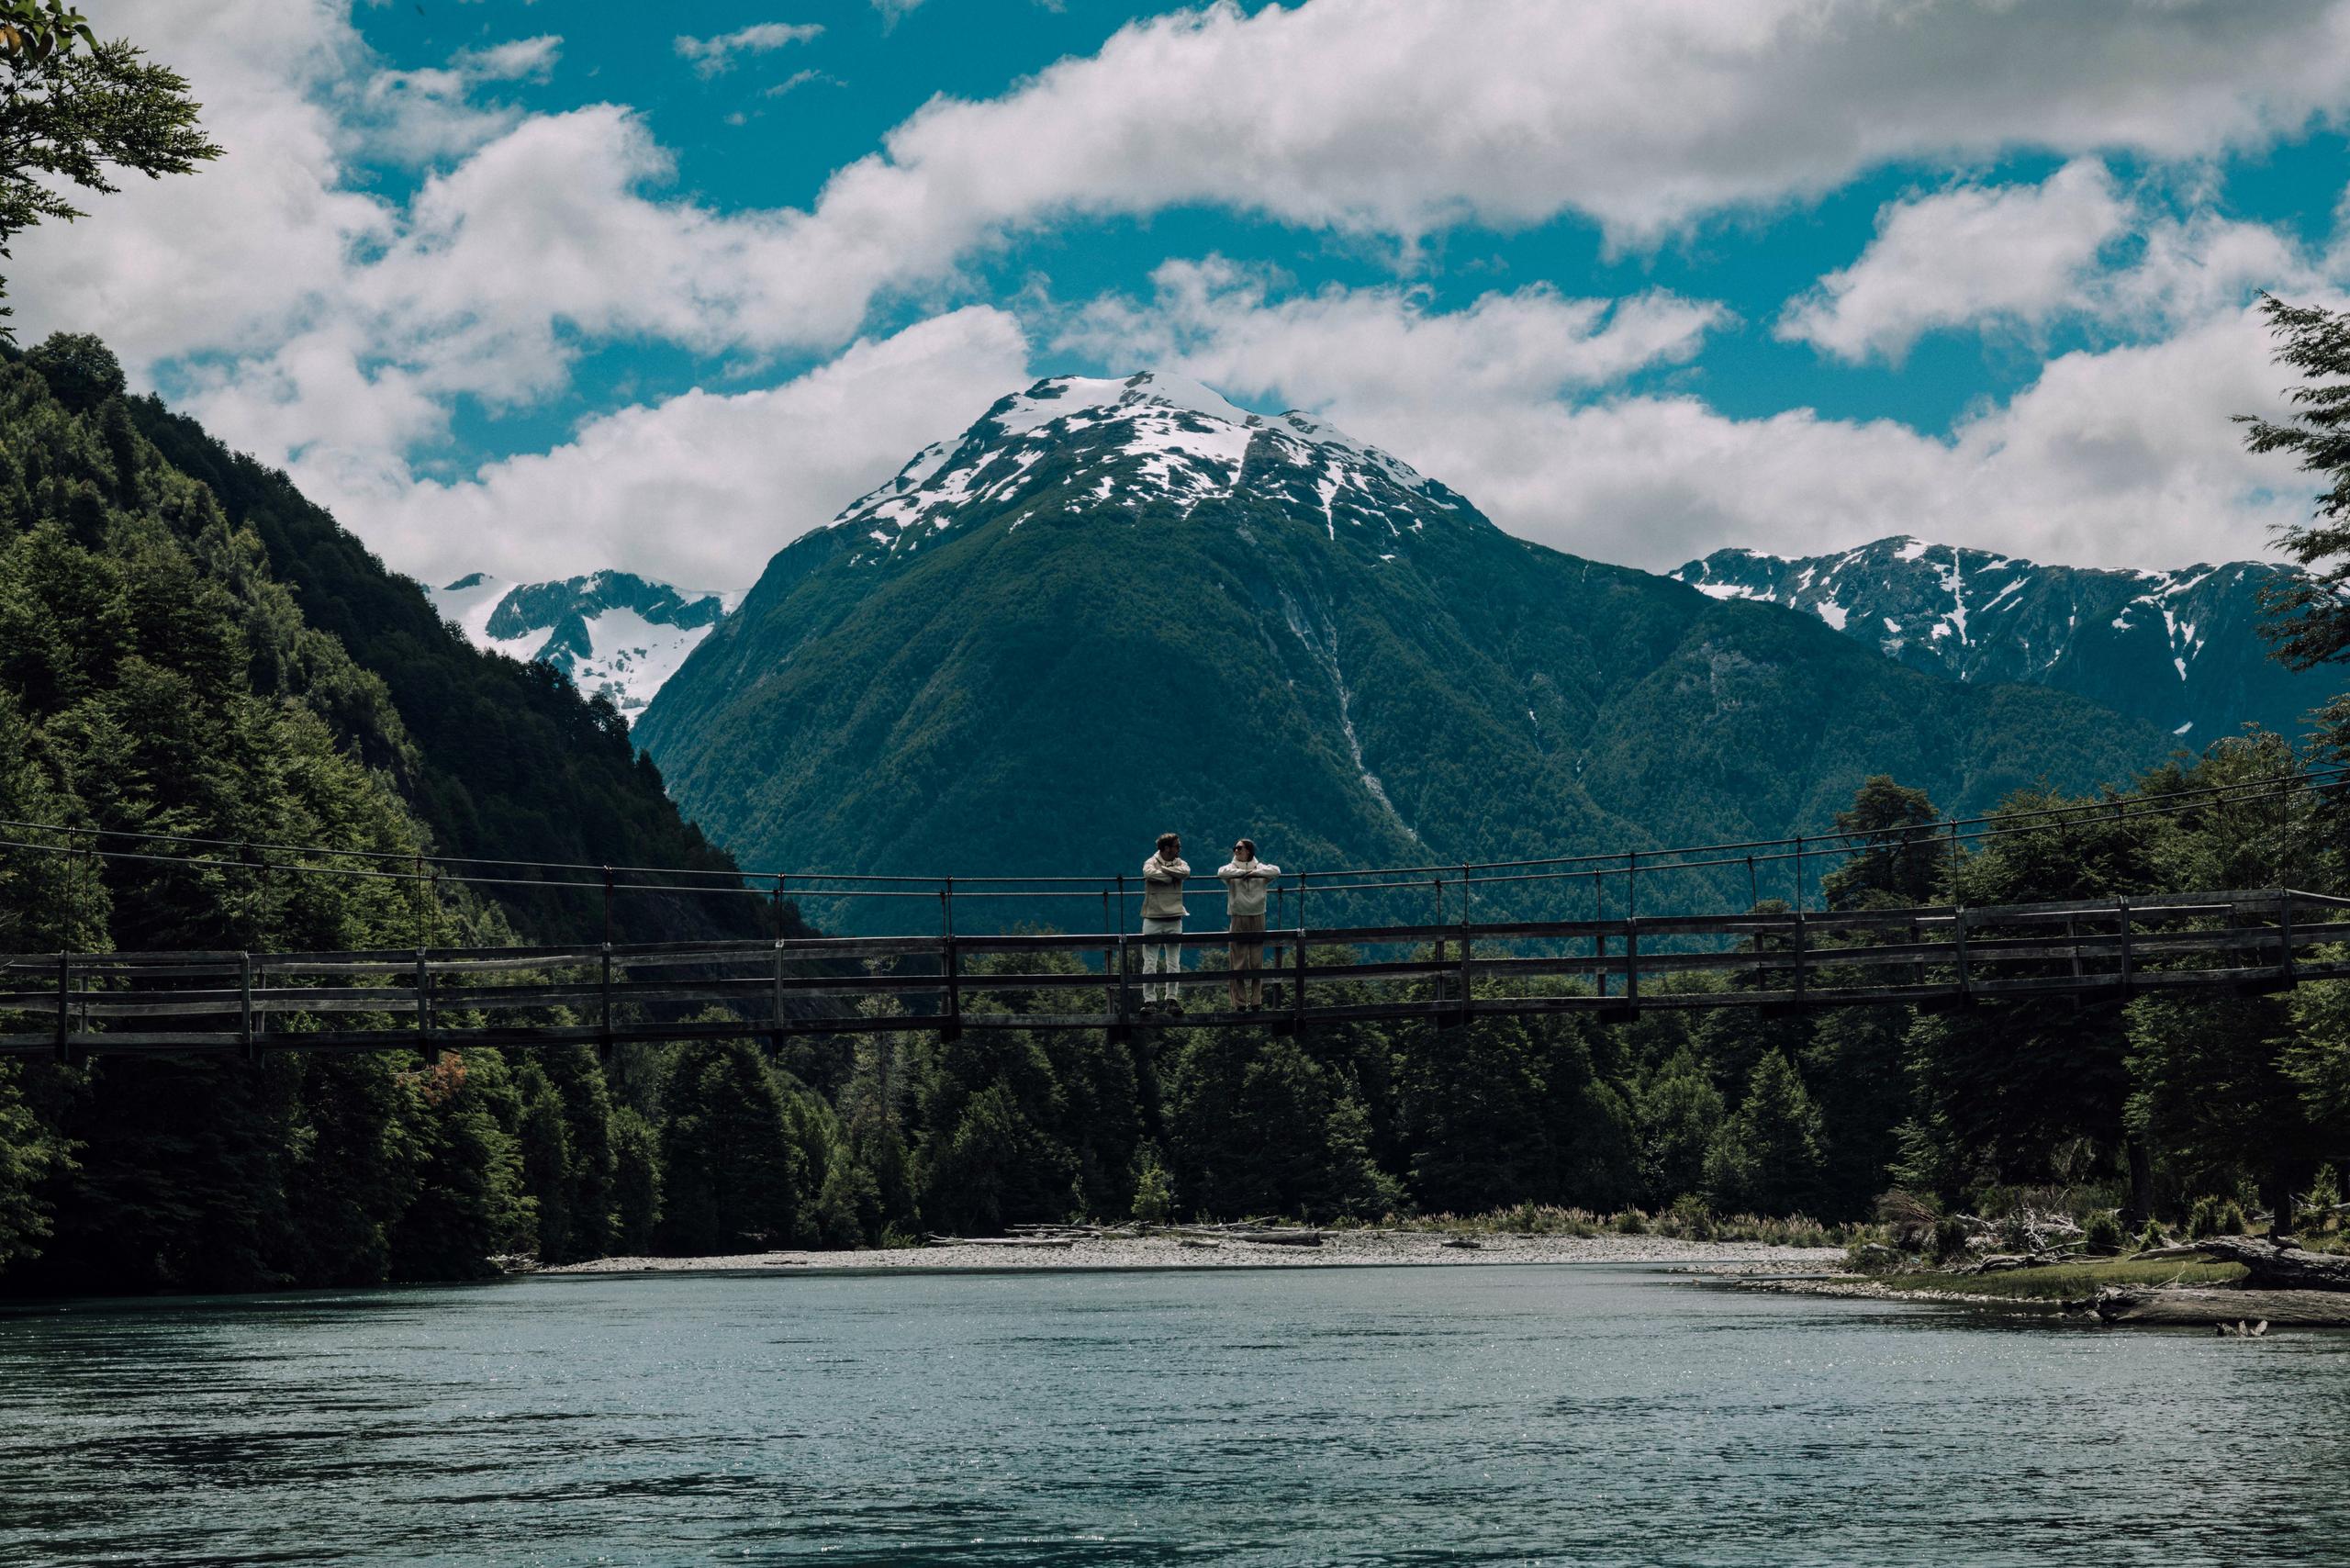 Man and woman standing on suspension bridge in Patagonia